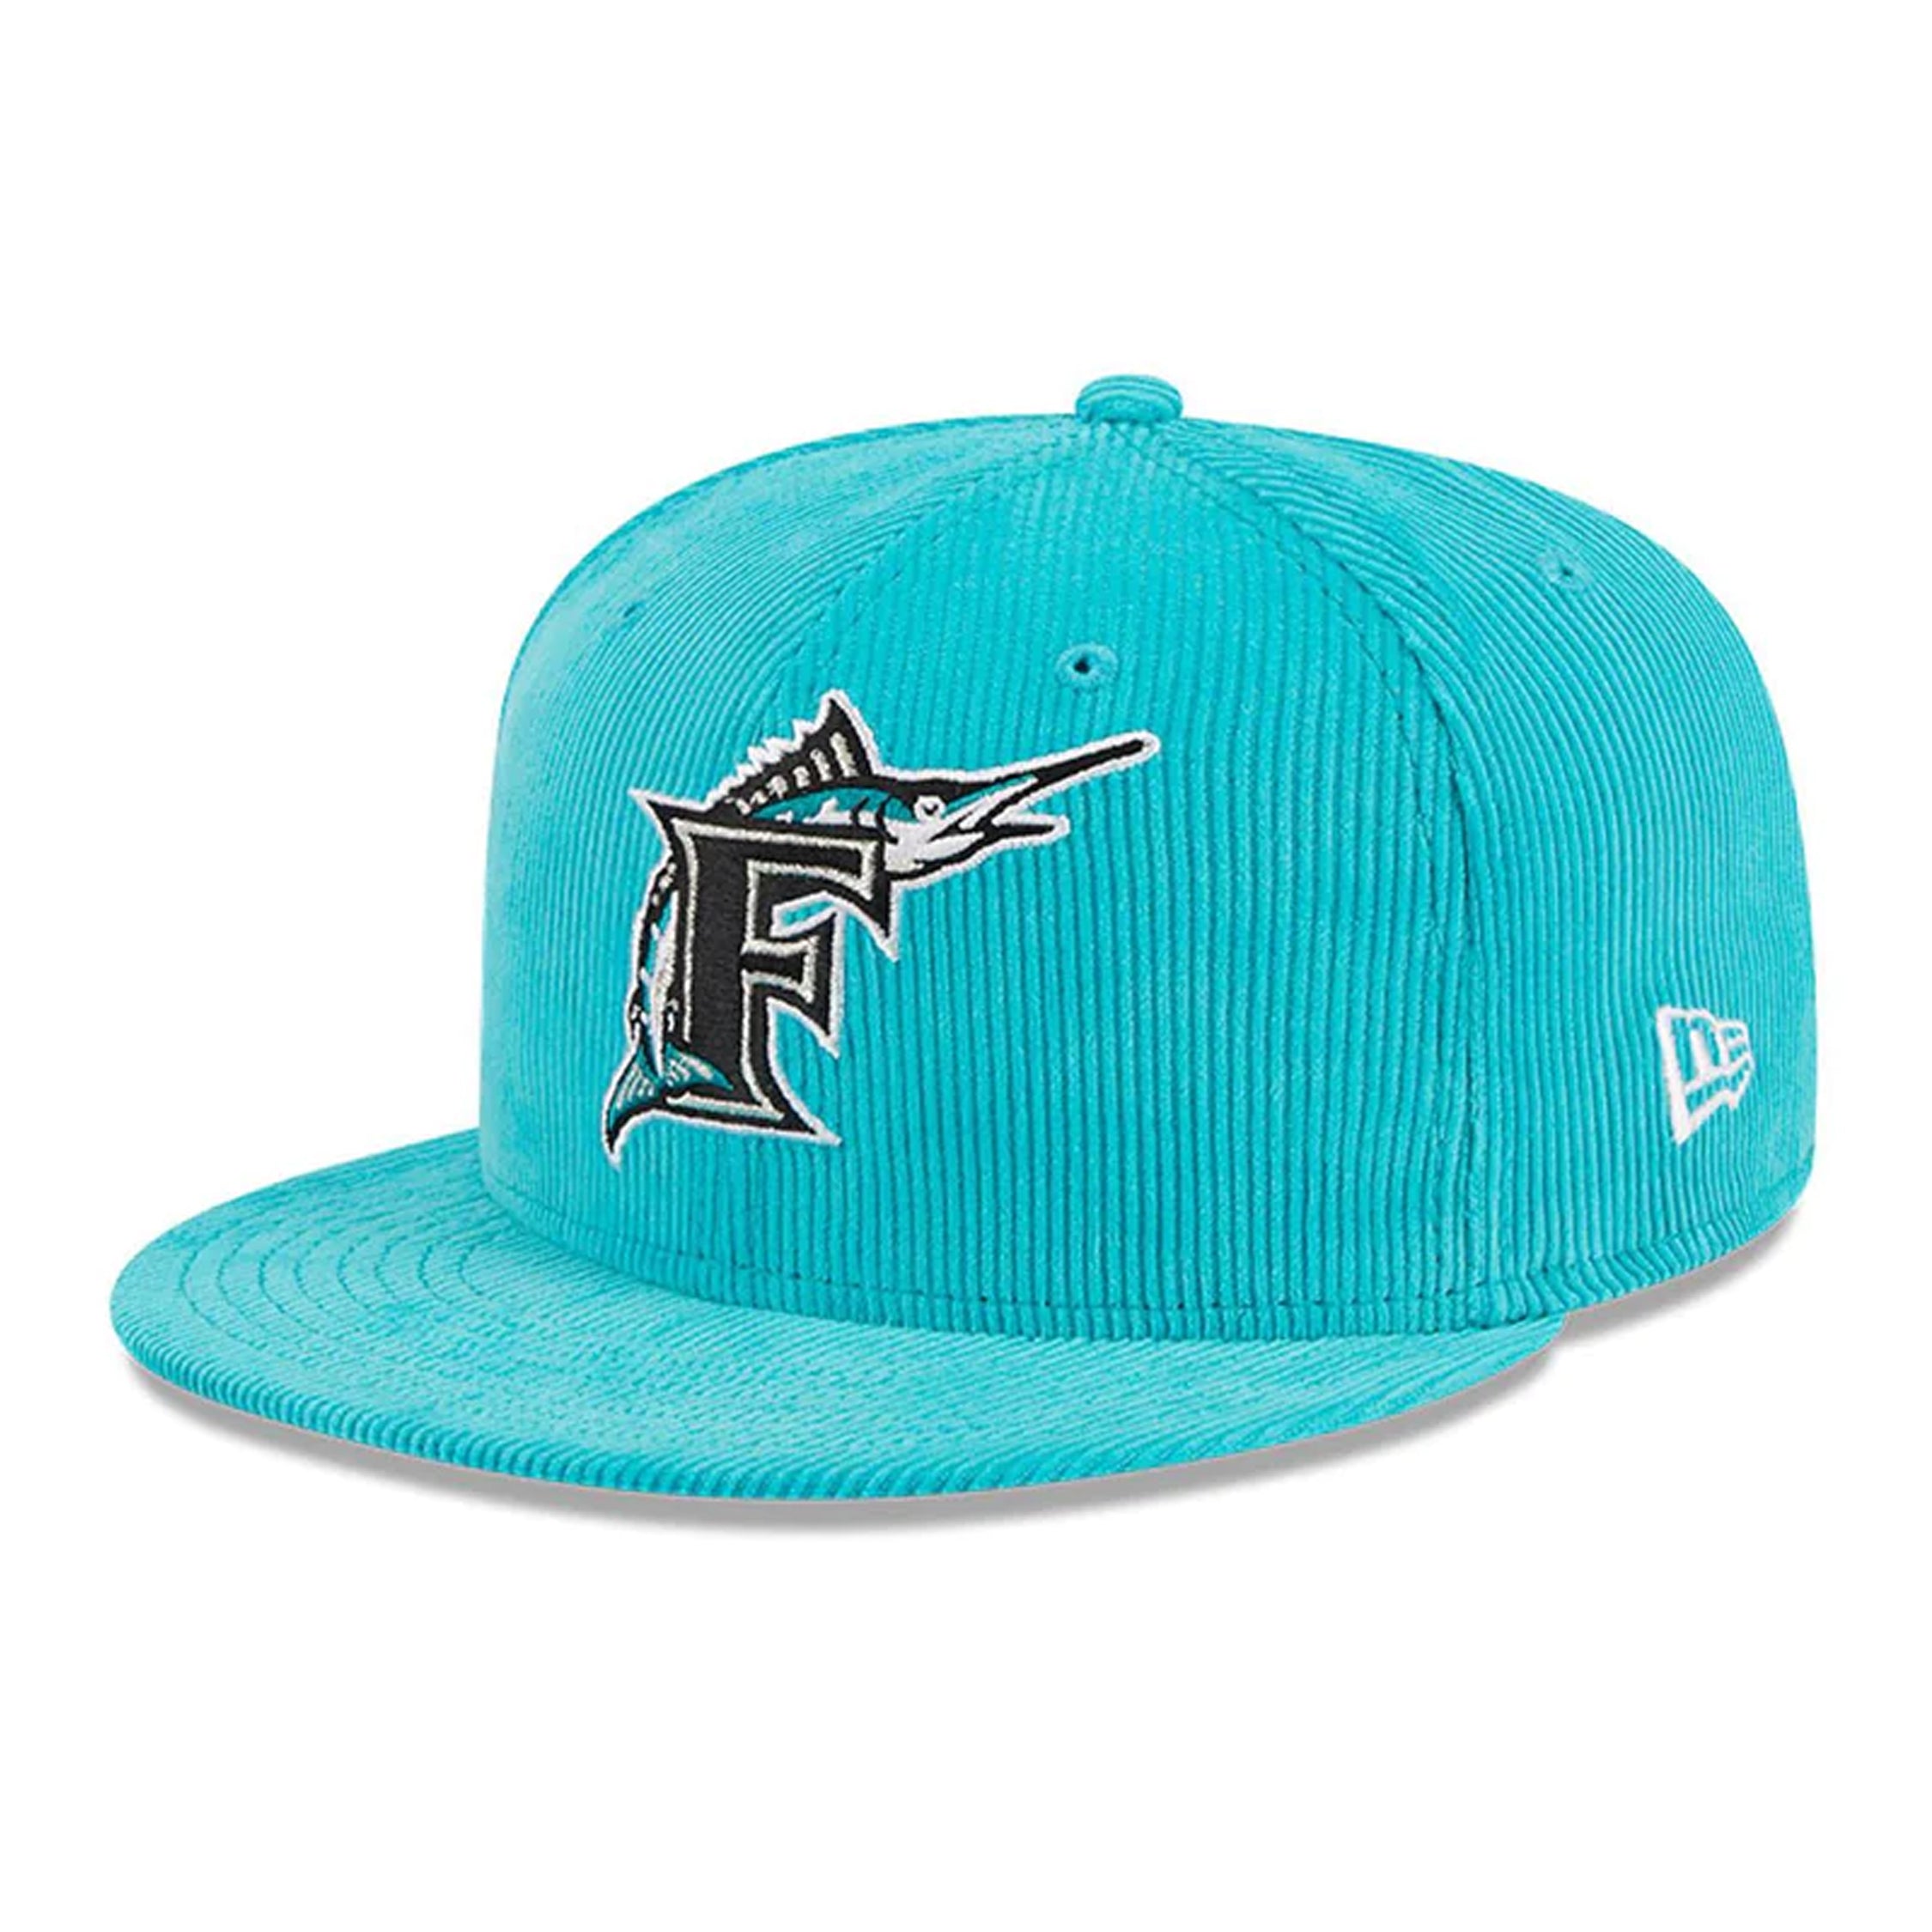 New Era Miami Marlins Fitted Hat Black/Green/Pink